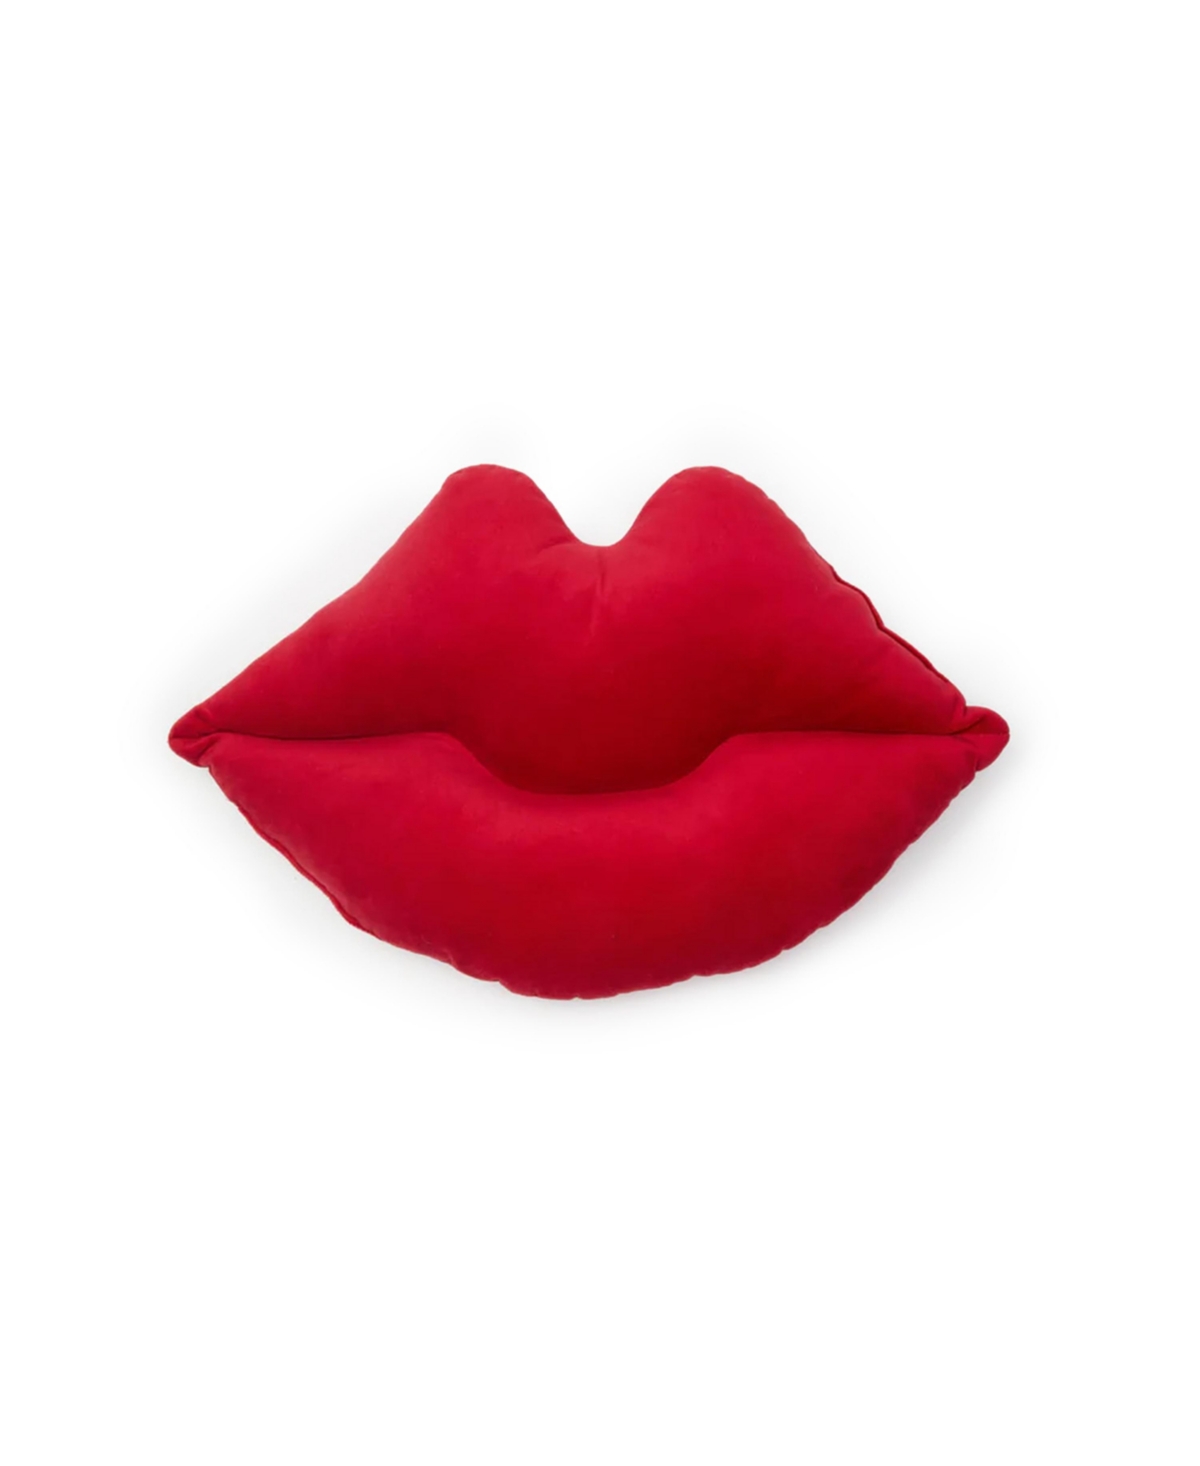 Dormify Coco Lips Shaped Pillow, 11" X 17", Ultra-cute Styles To Personalize Your Room In Coco Lips Red